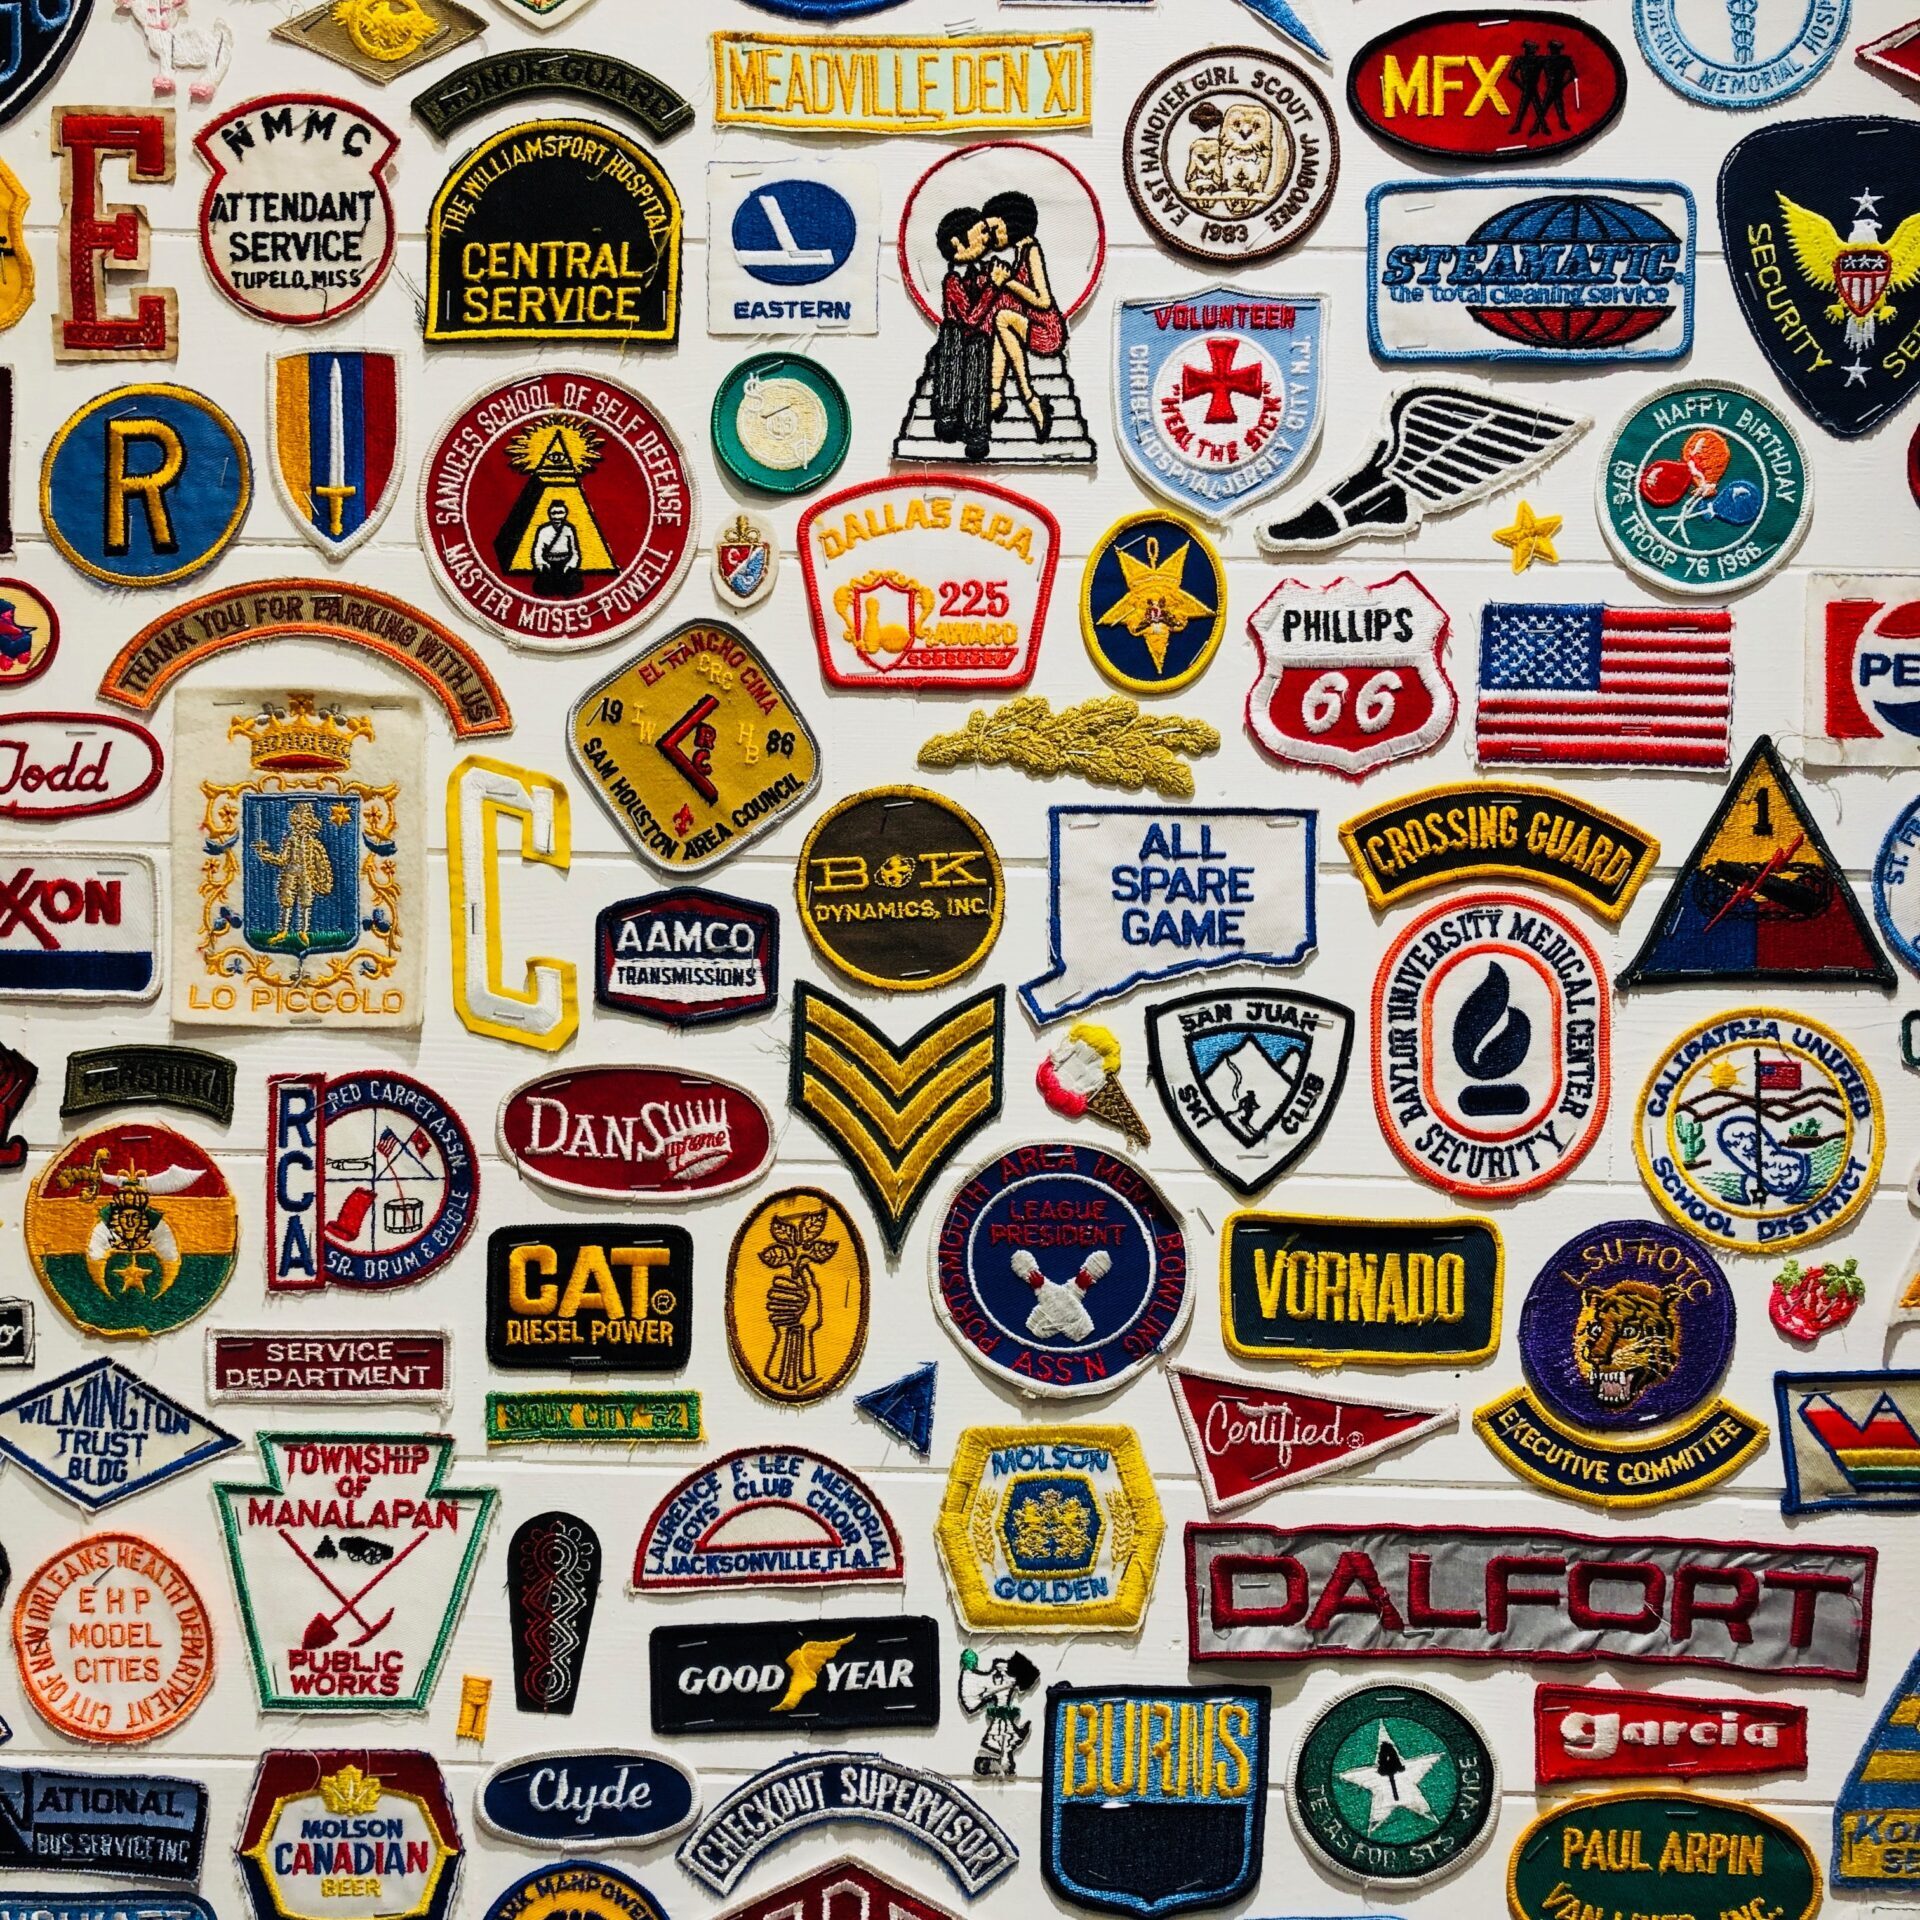 multiple and various patches representing brand development strategies | ampersand branding